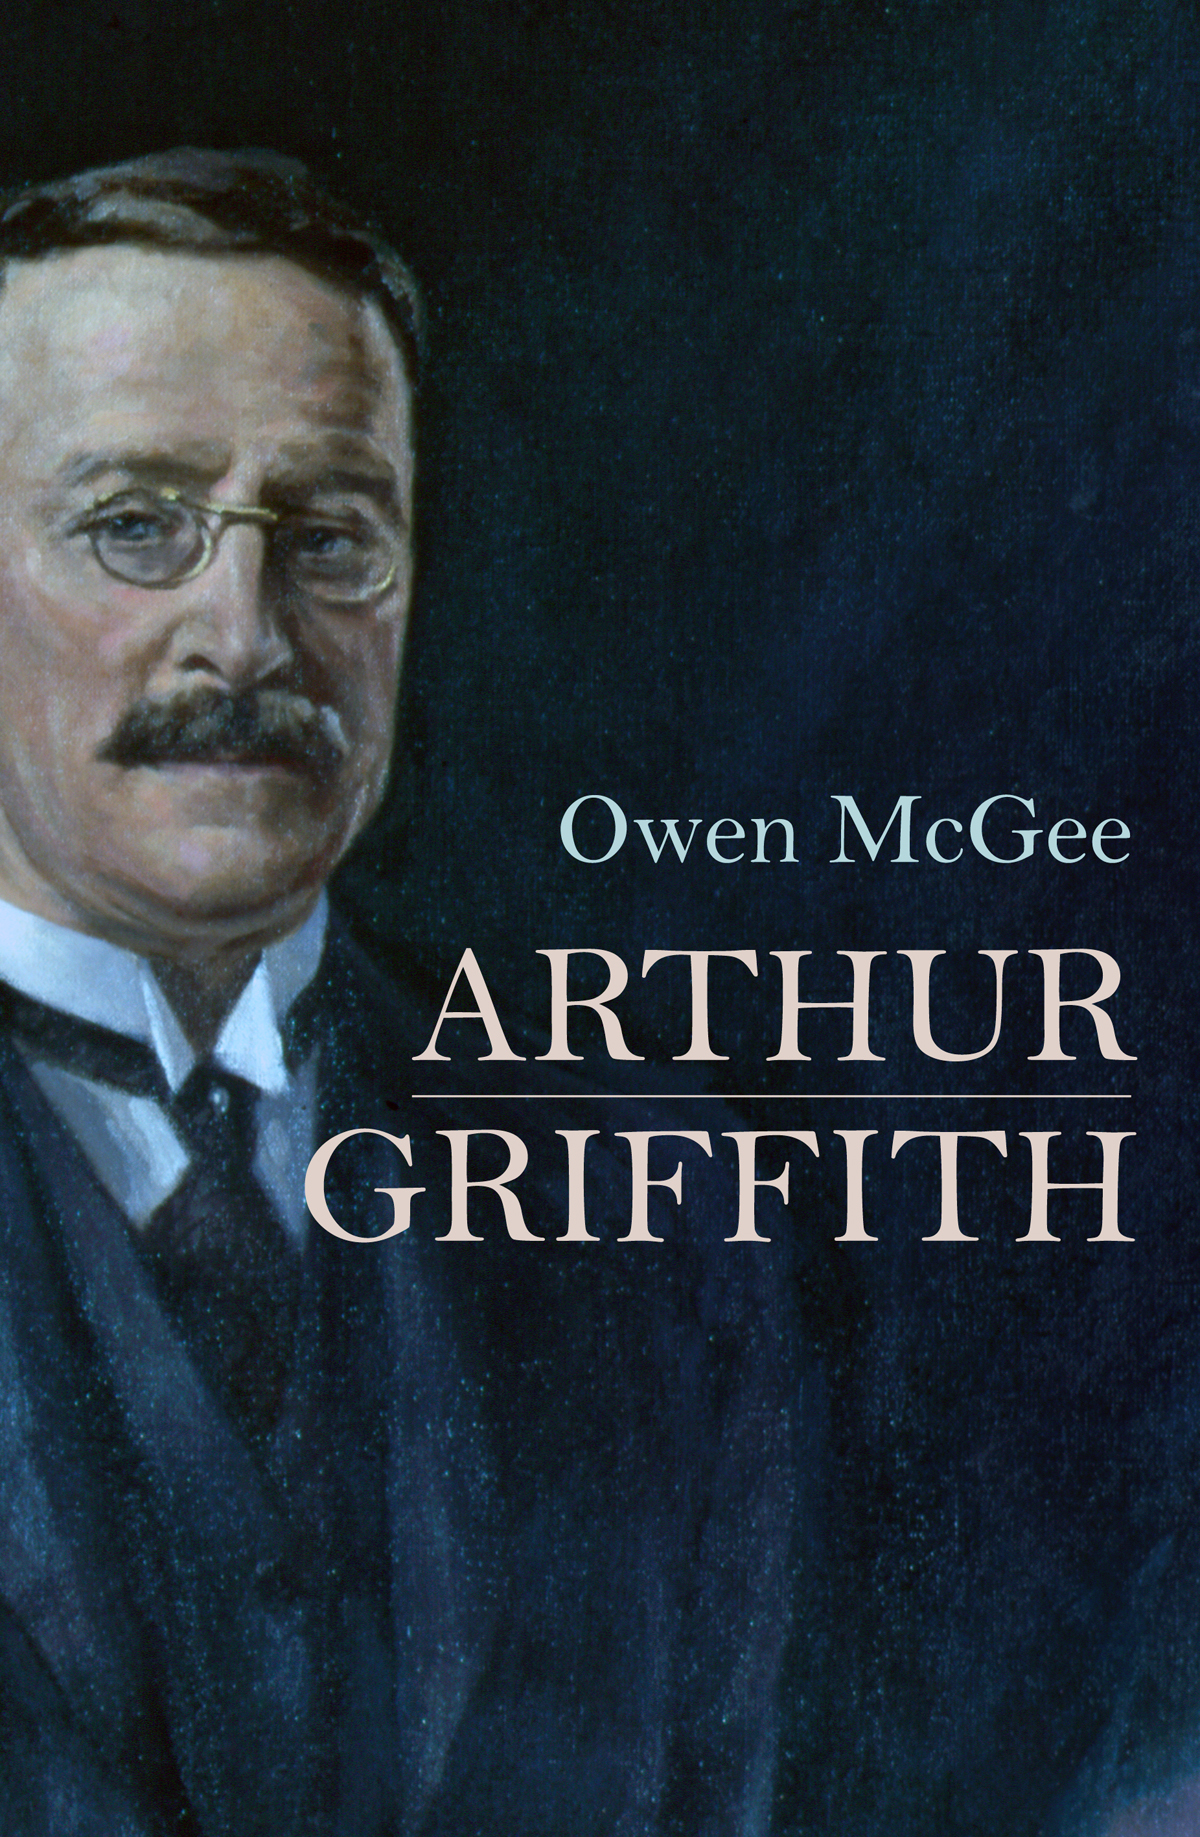 Owen McGee’s biography of Arthur Griffith is on sale now